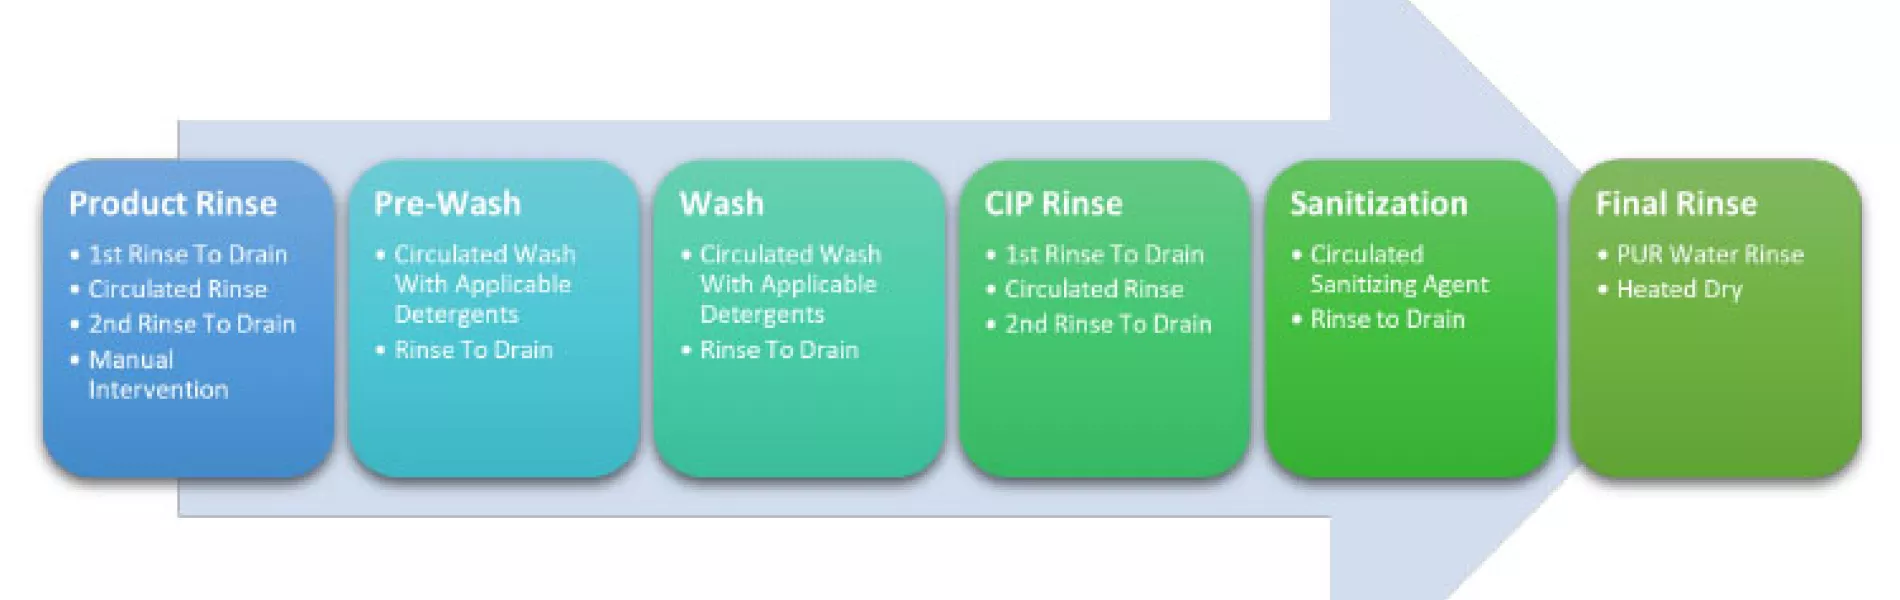 Figure 1: Cleaning recipe process map.